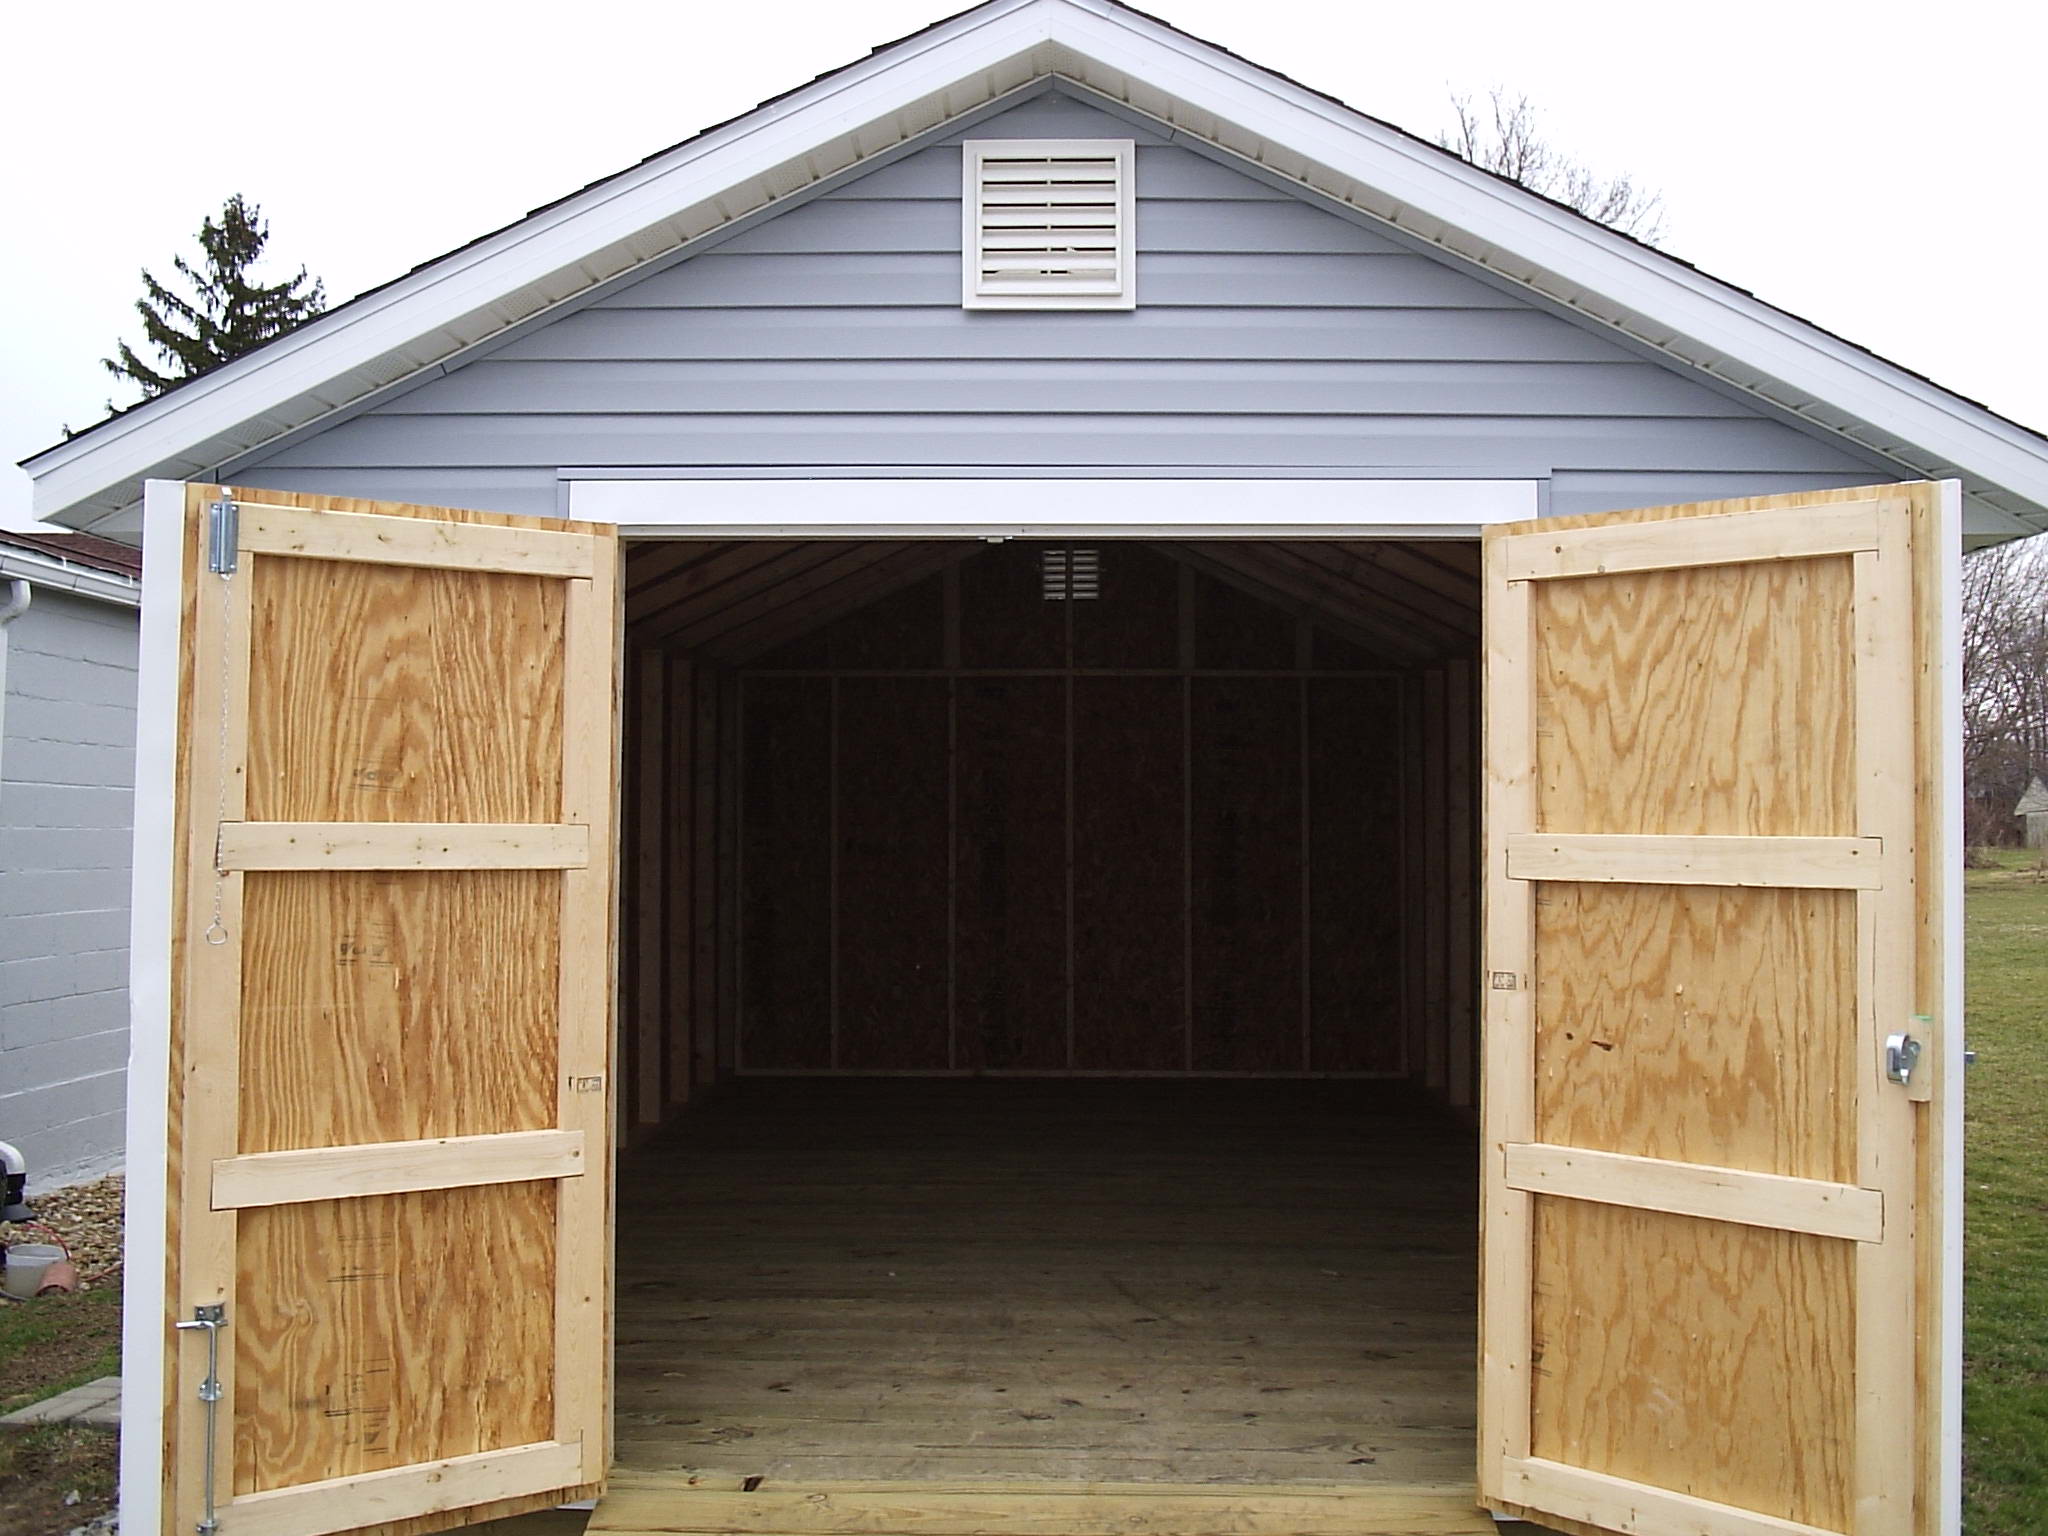 How To Buy Replacement Wood Shed Doors For Your Back Yard Storage Shed